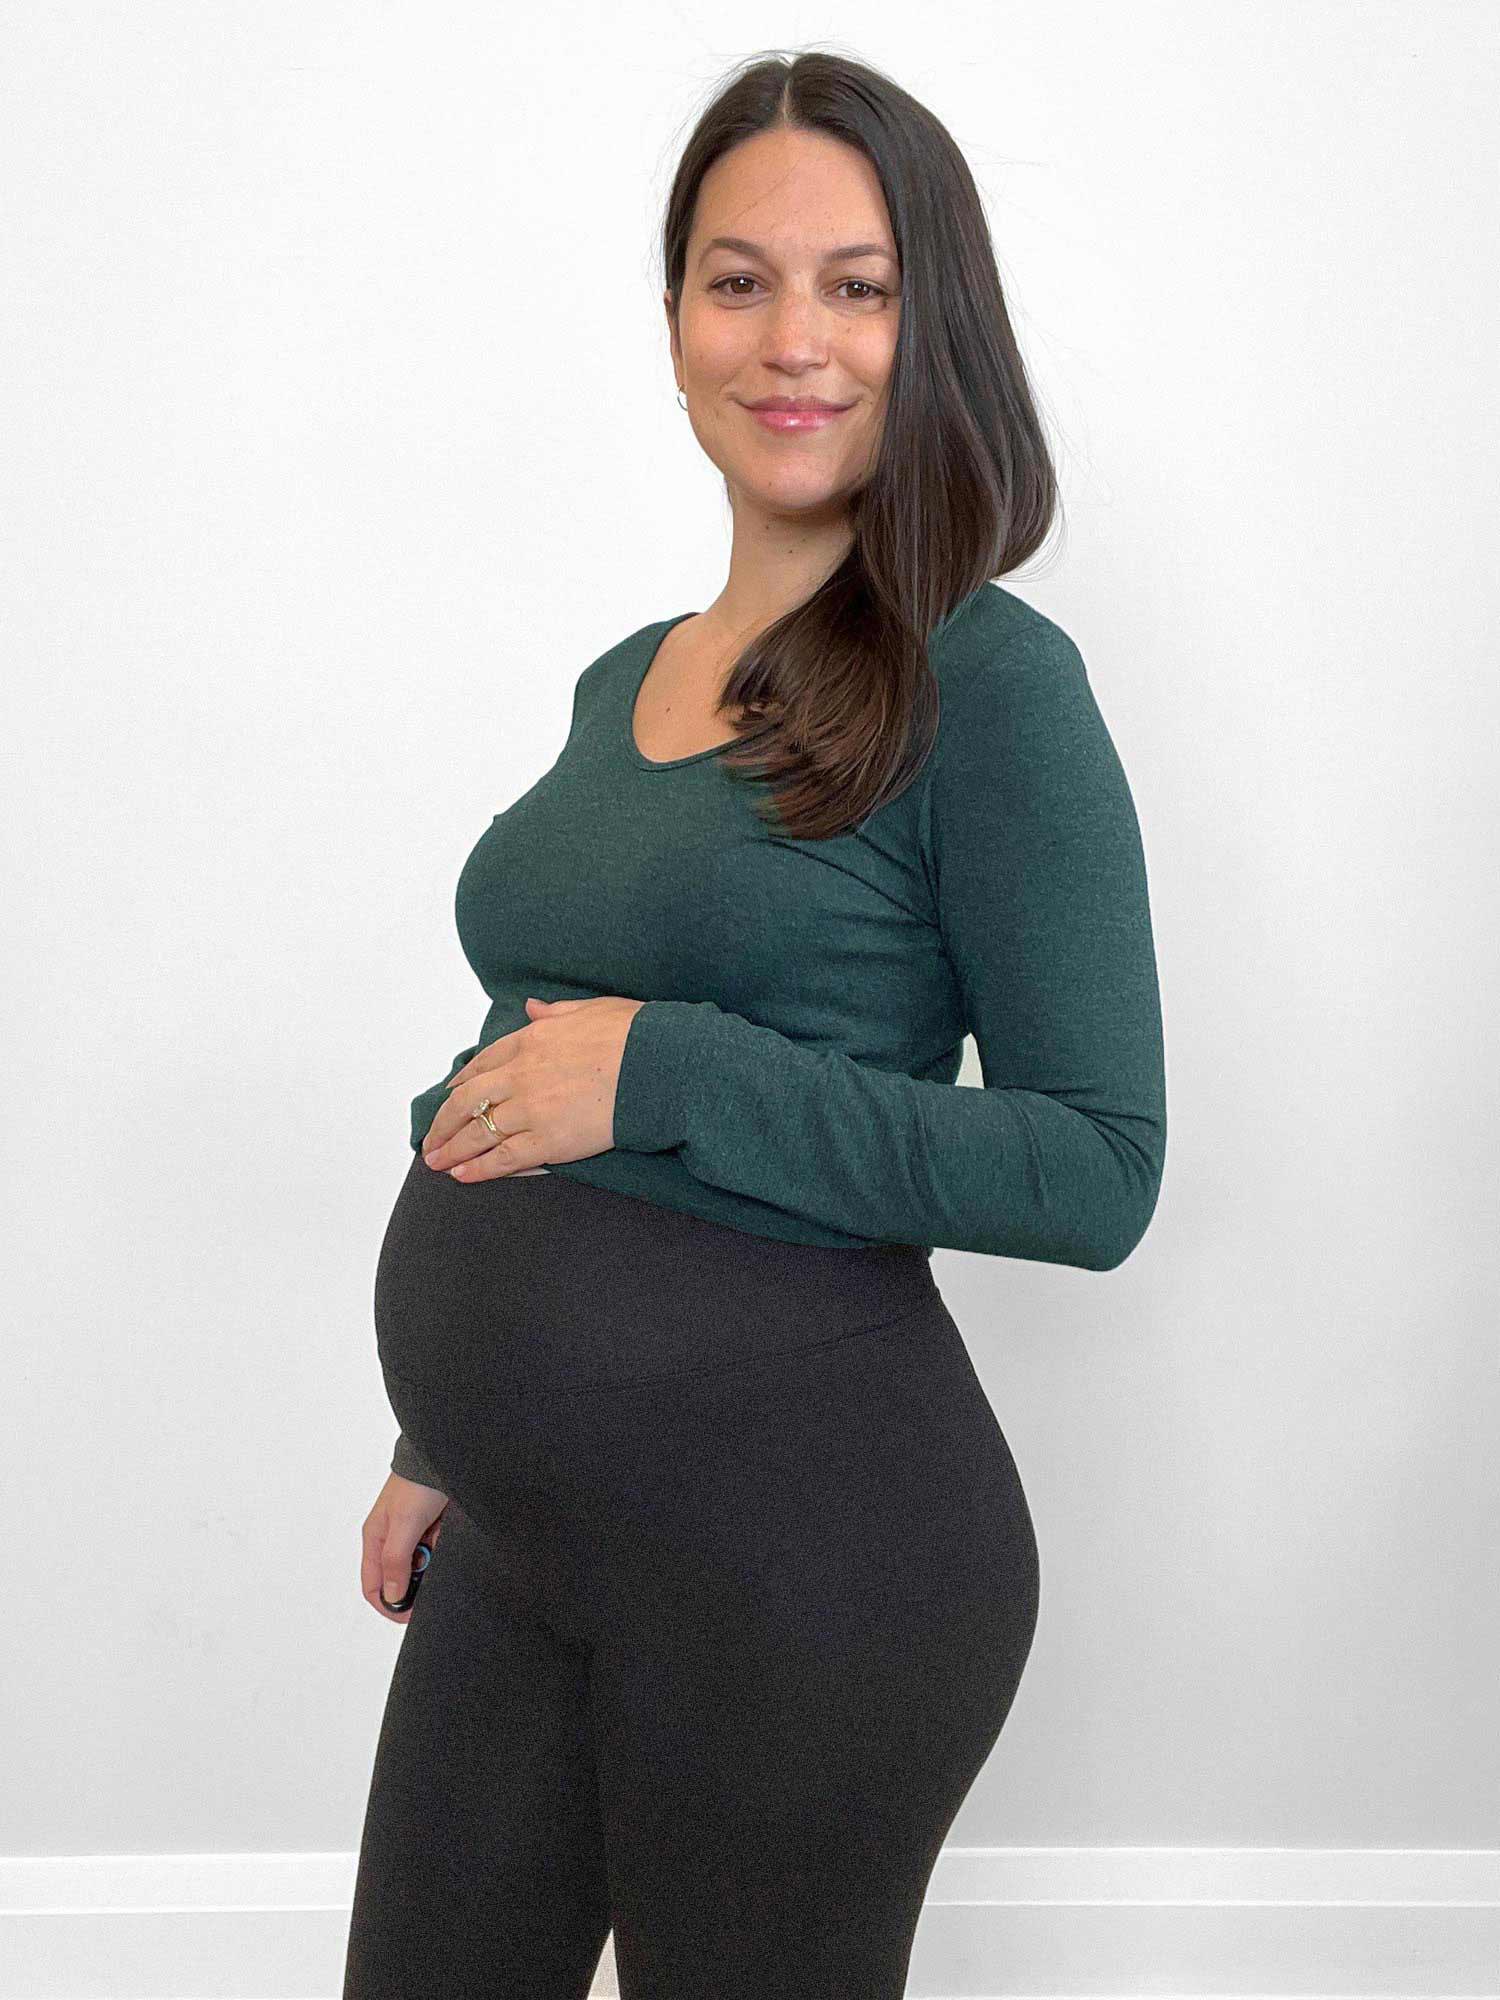 Pregnant woman wearing Miik's Lisa2 high waisted legging in charcoal with a long sleeve tee